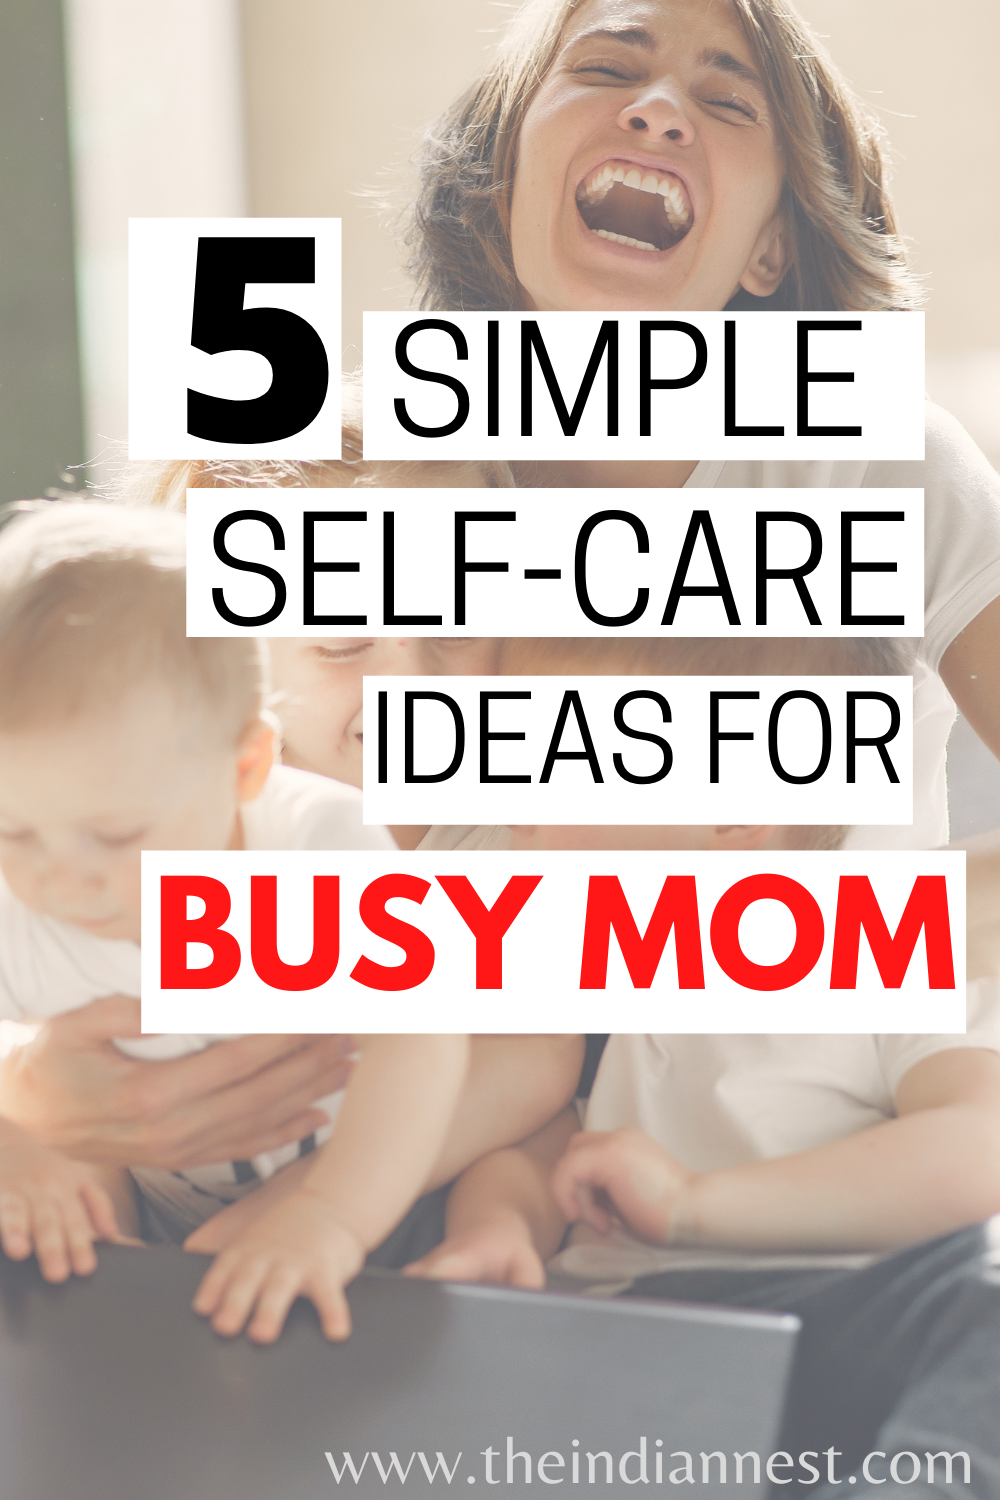 Sticking to your usual workout routine can be challenging for busy moms. Whether you can spare a few minutes or have time for a longer activity, here are some affordable self-care ideas for moms.